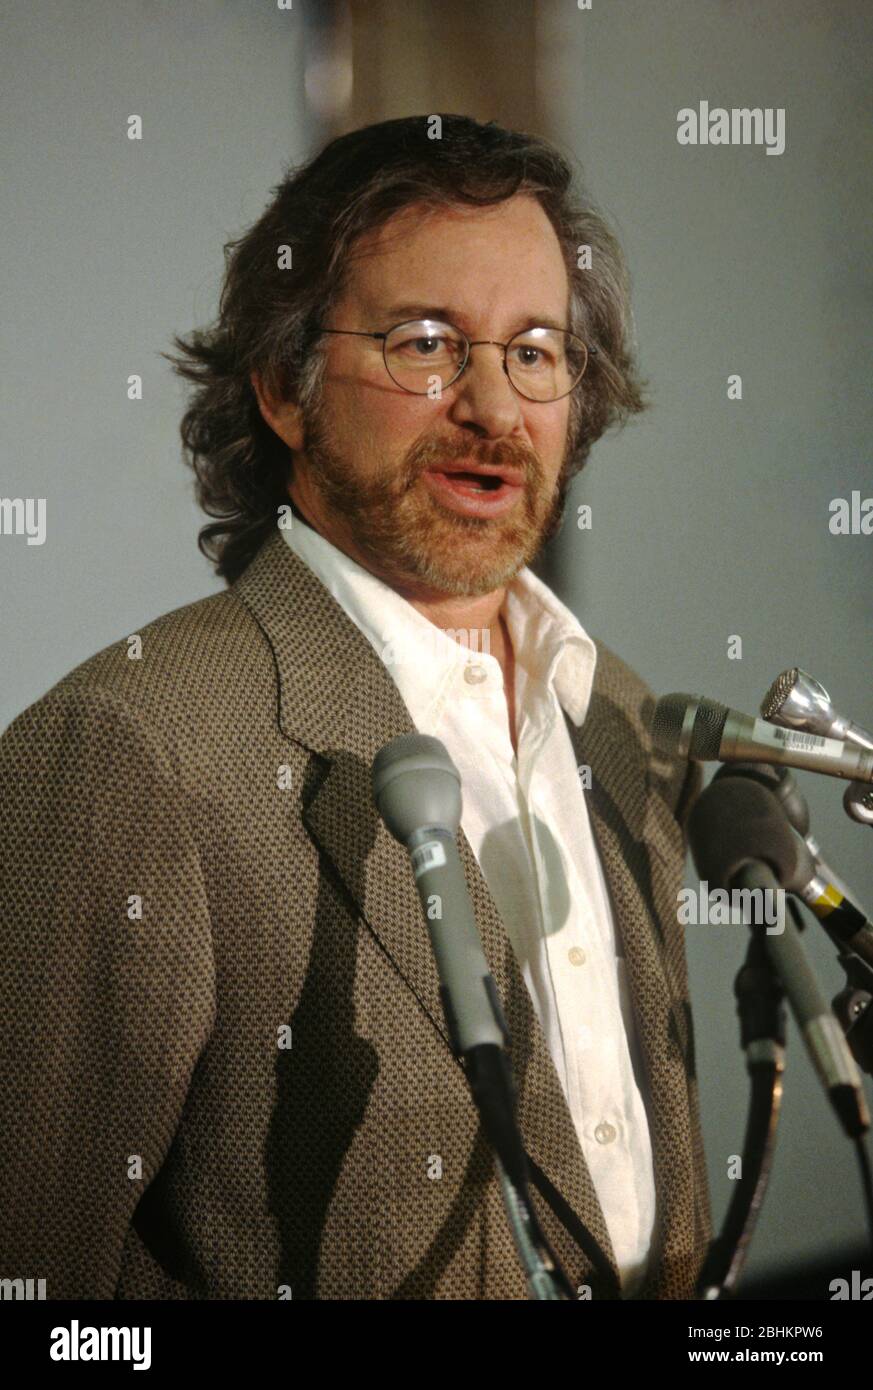 American Filmmaker Steven Spielberg speaks during a technology in education event, July 23, 1996 in Washington, DC, United States. Stock Photo